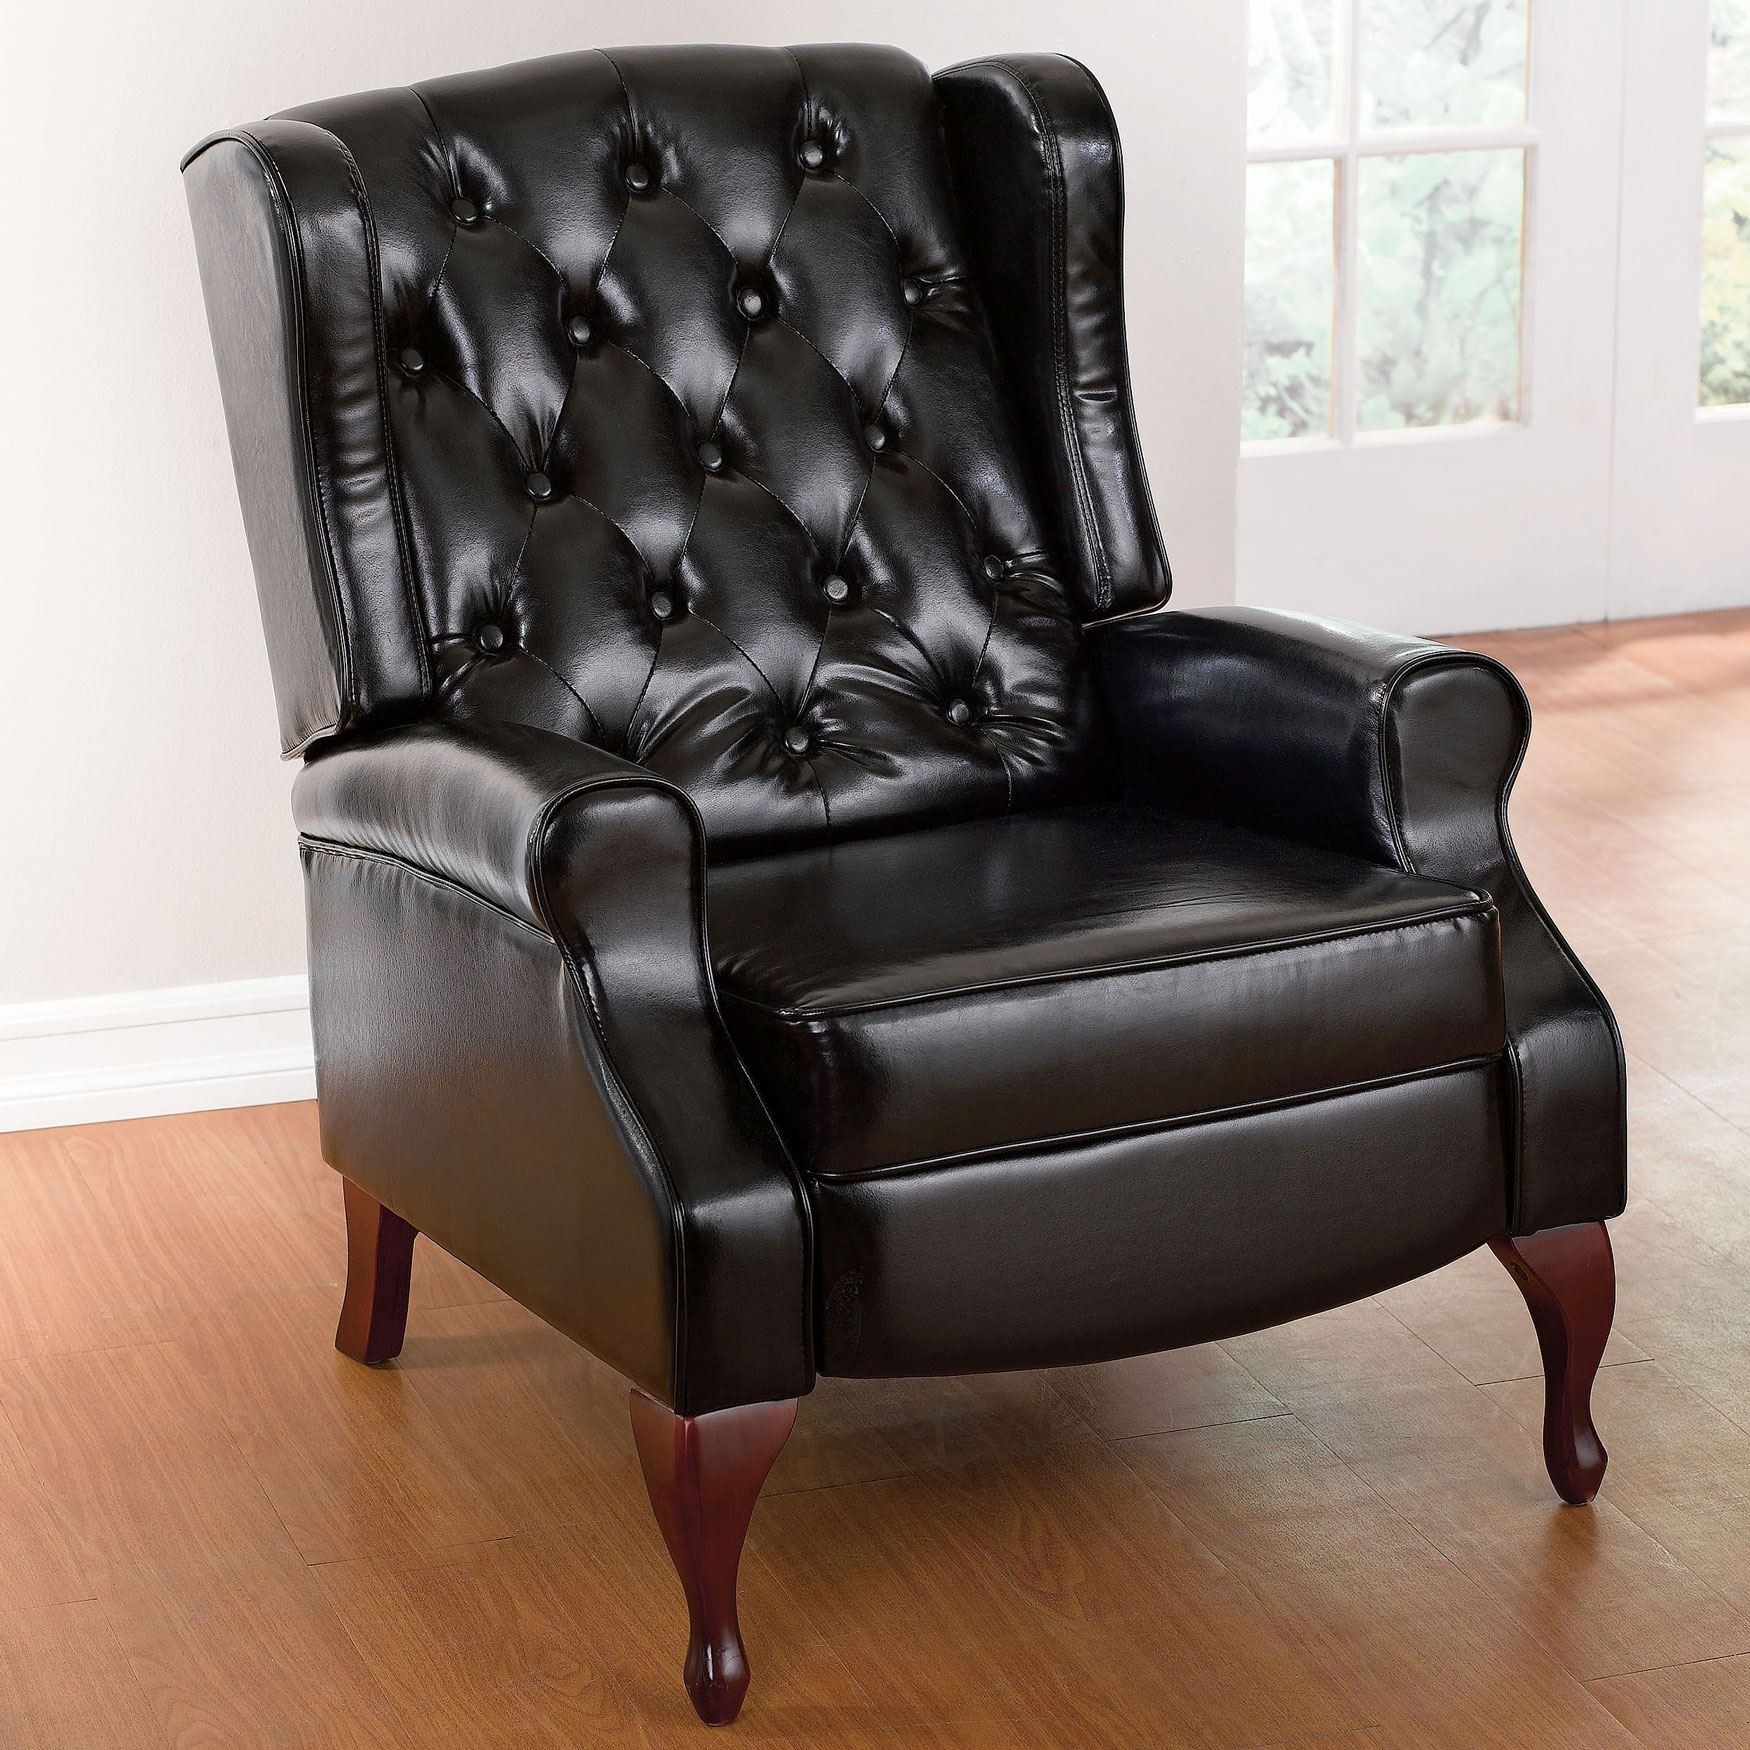 Queen anne leather recliner